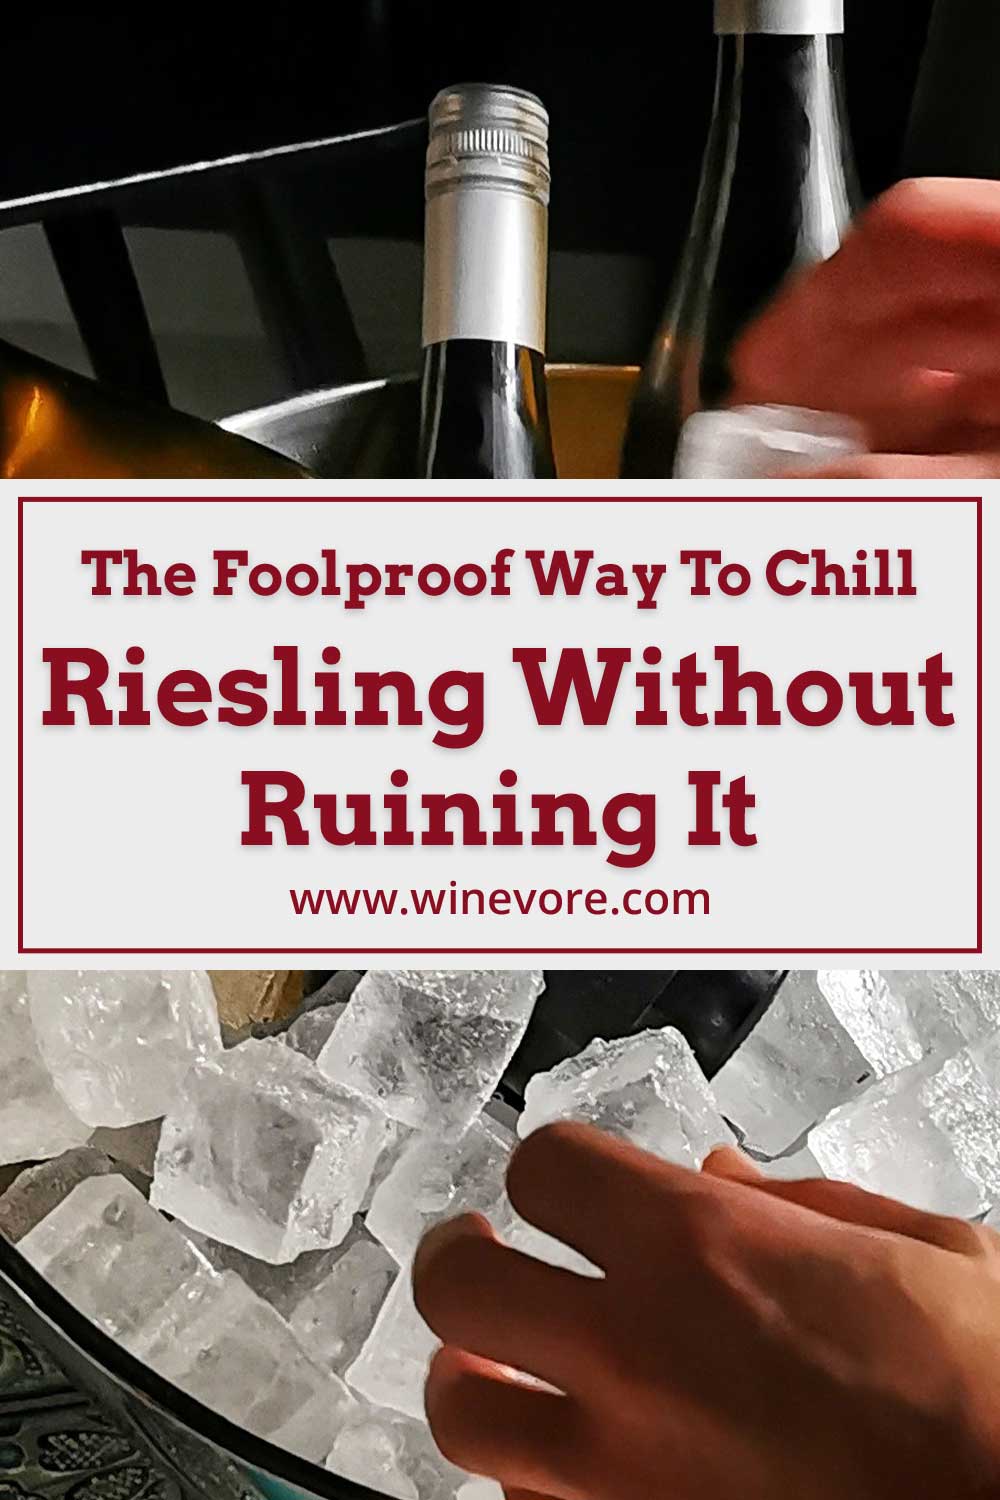 A wine bottle in a bucket full of ice - Way To Chill Riesling.